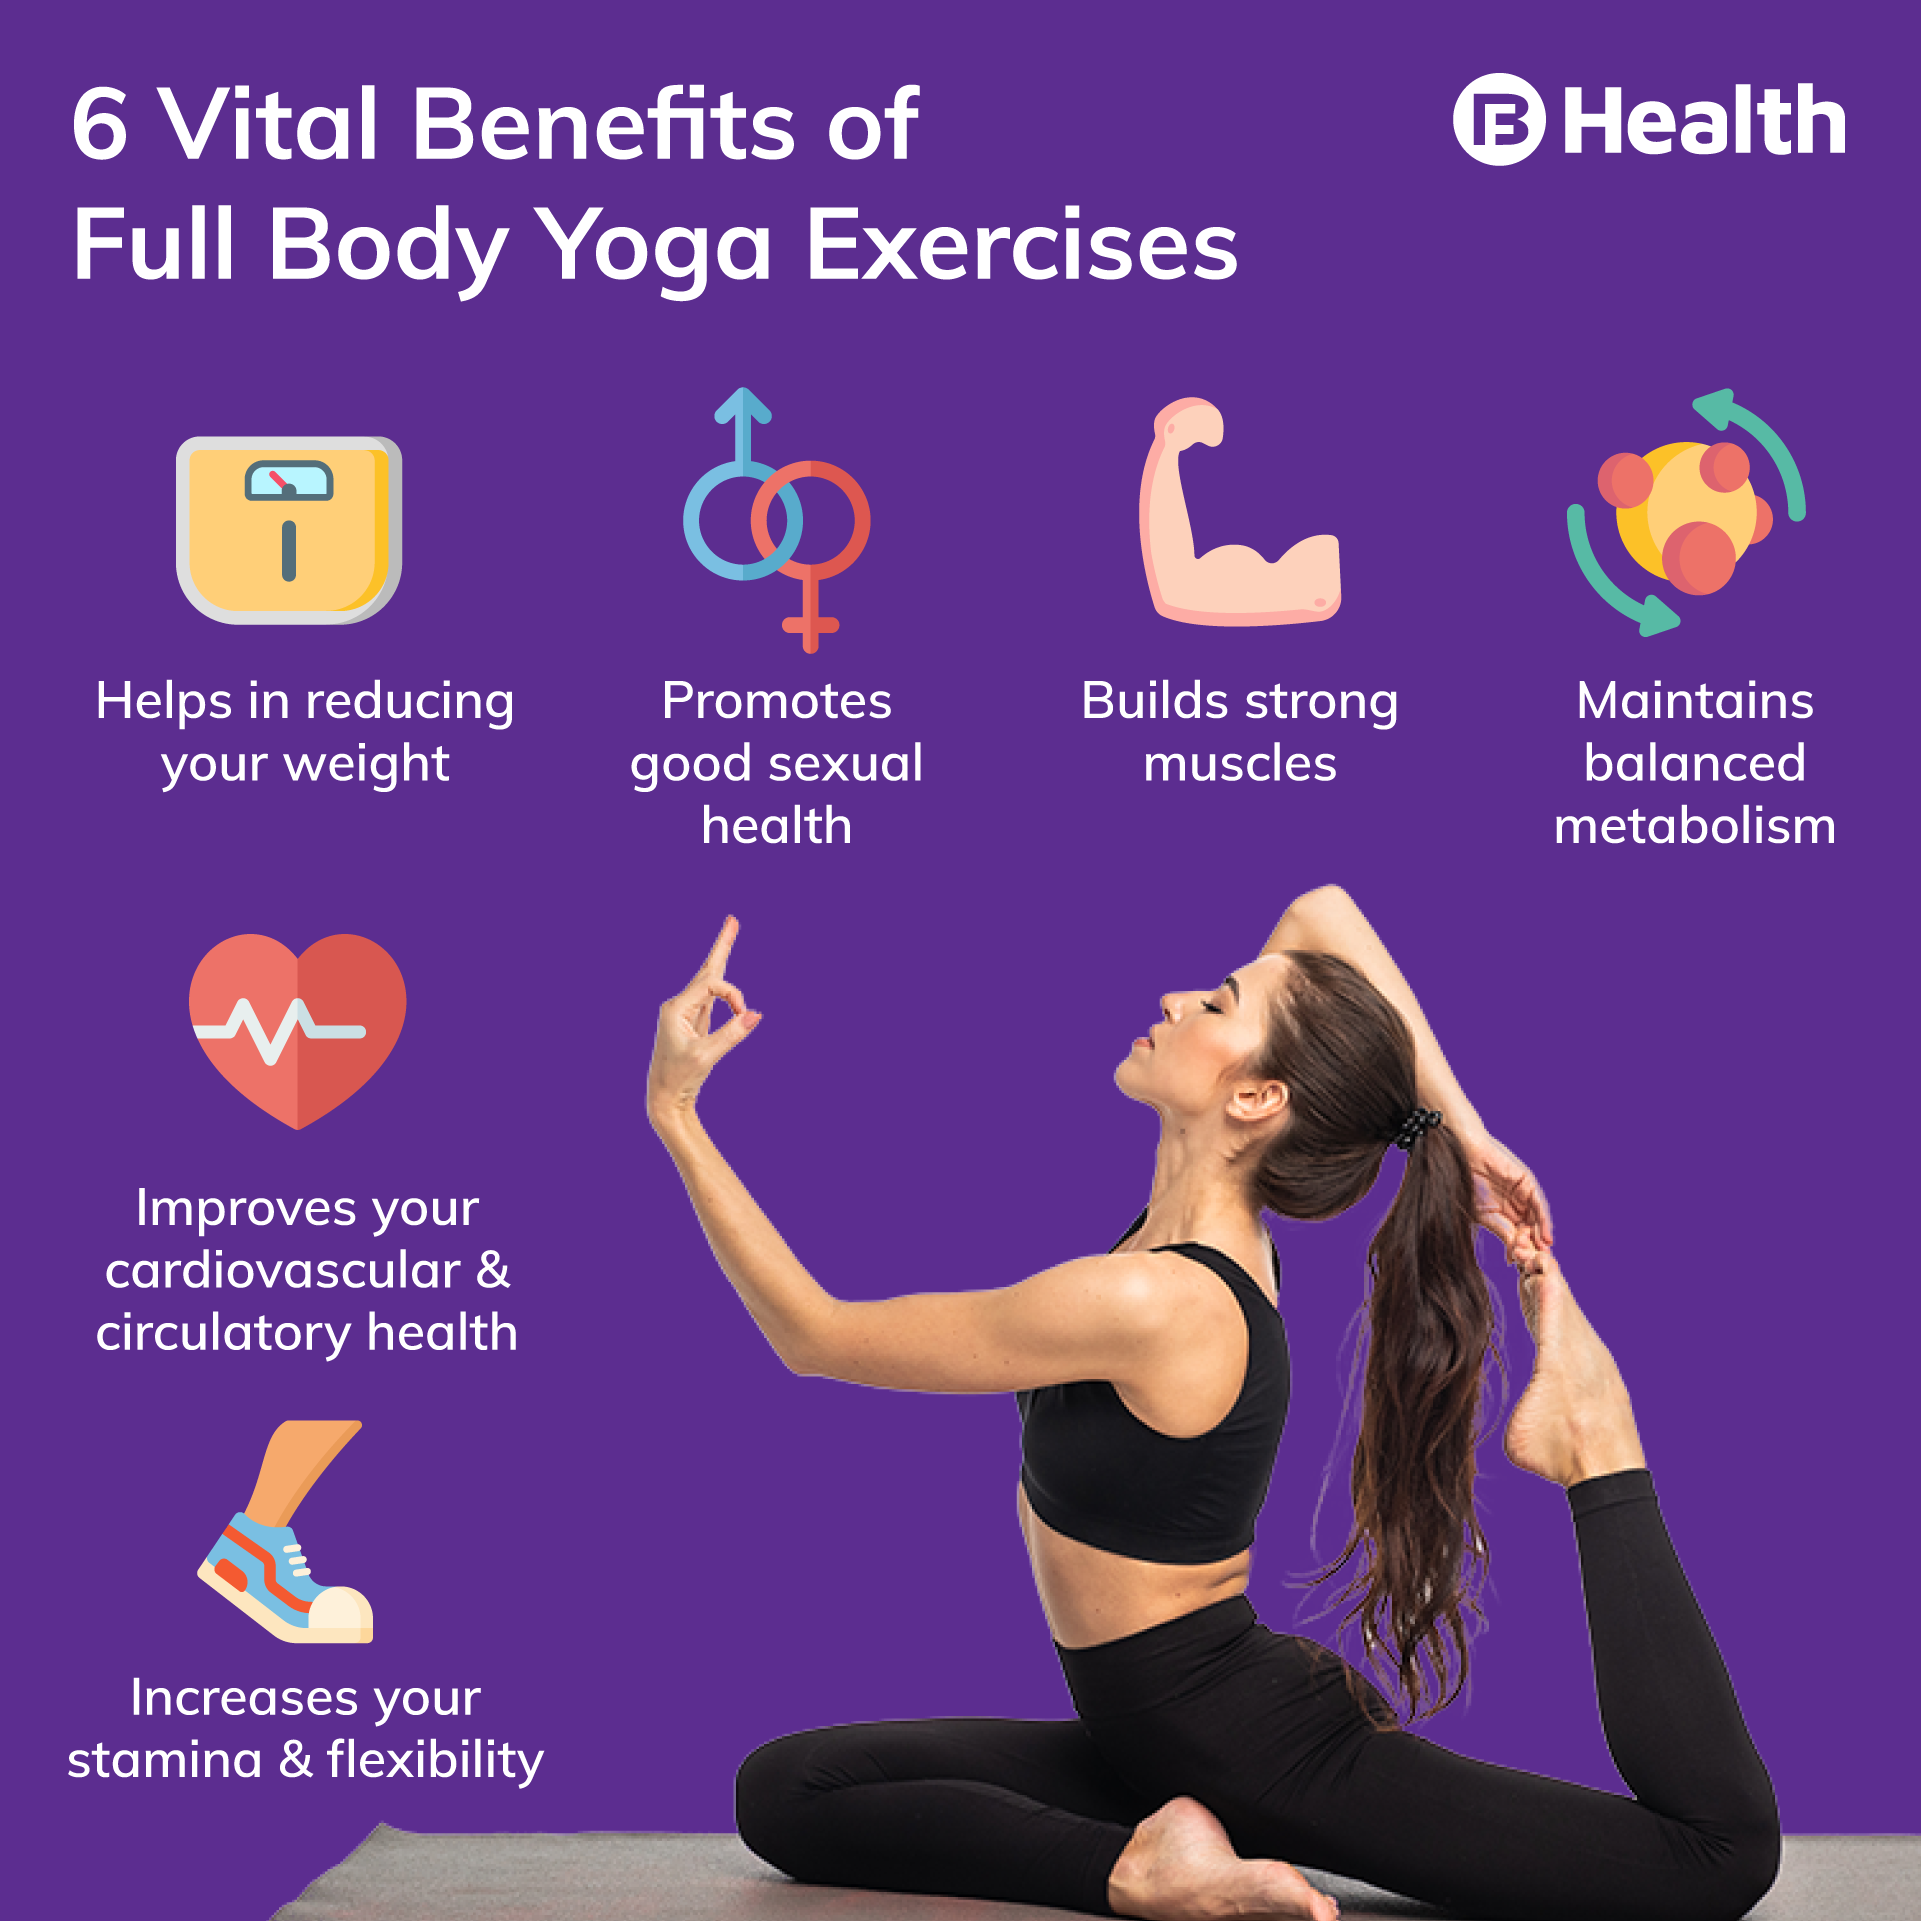 How to Do Yoga: Tips & Poses for Beginners